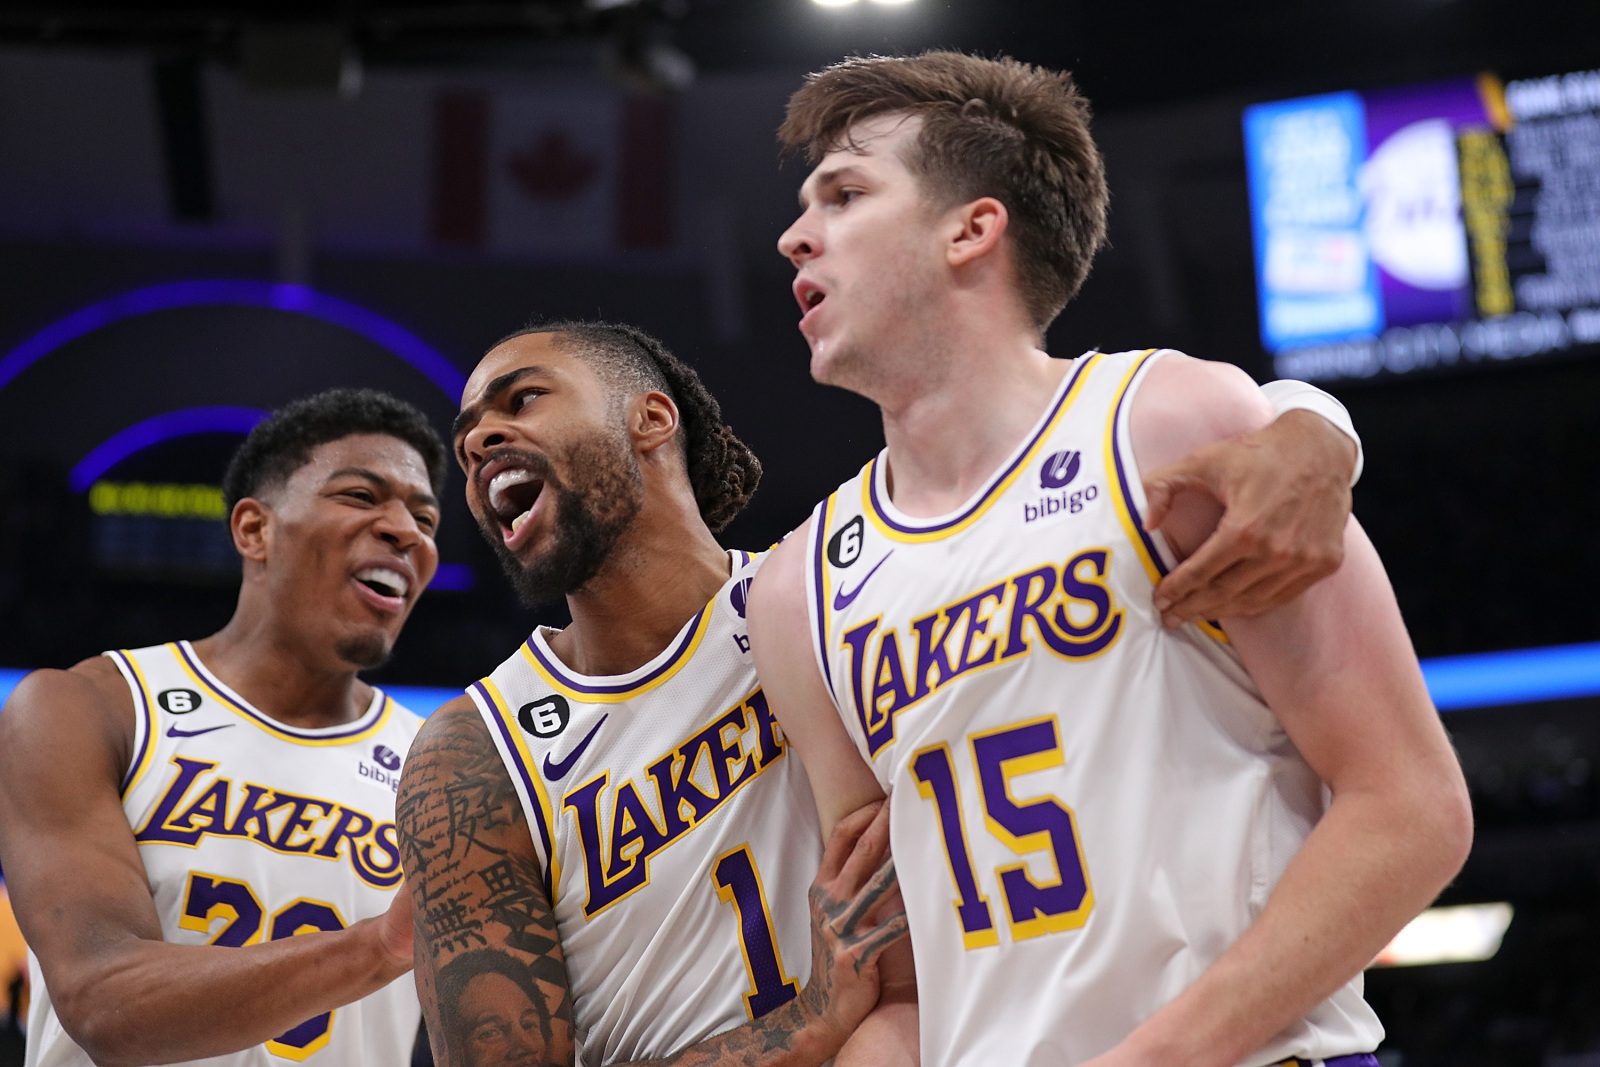 Way too early prediction for the Lakers' 2023-24 starting lineup